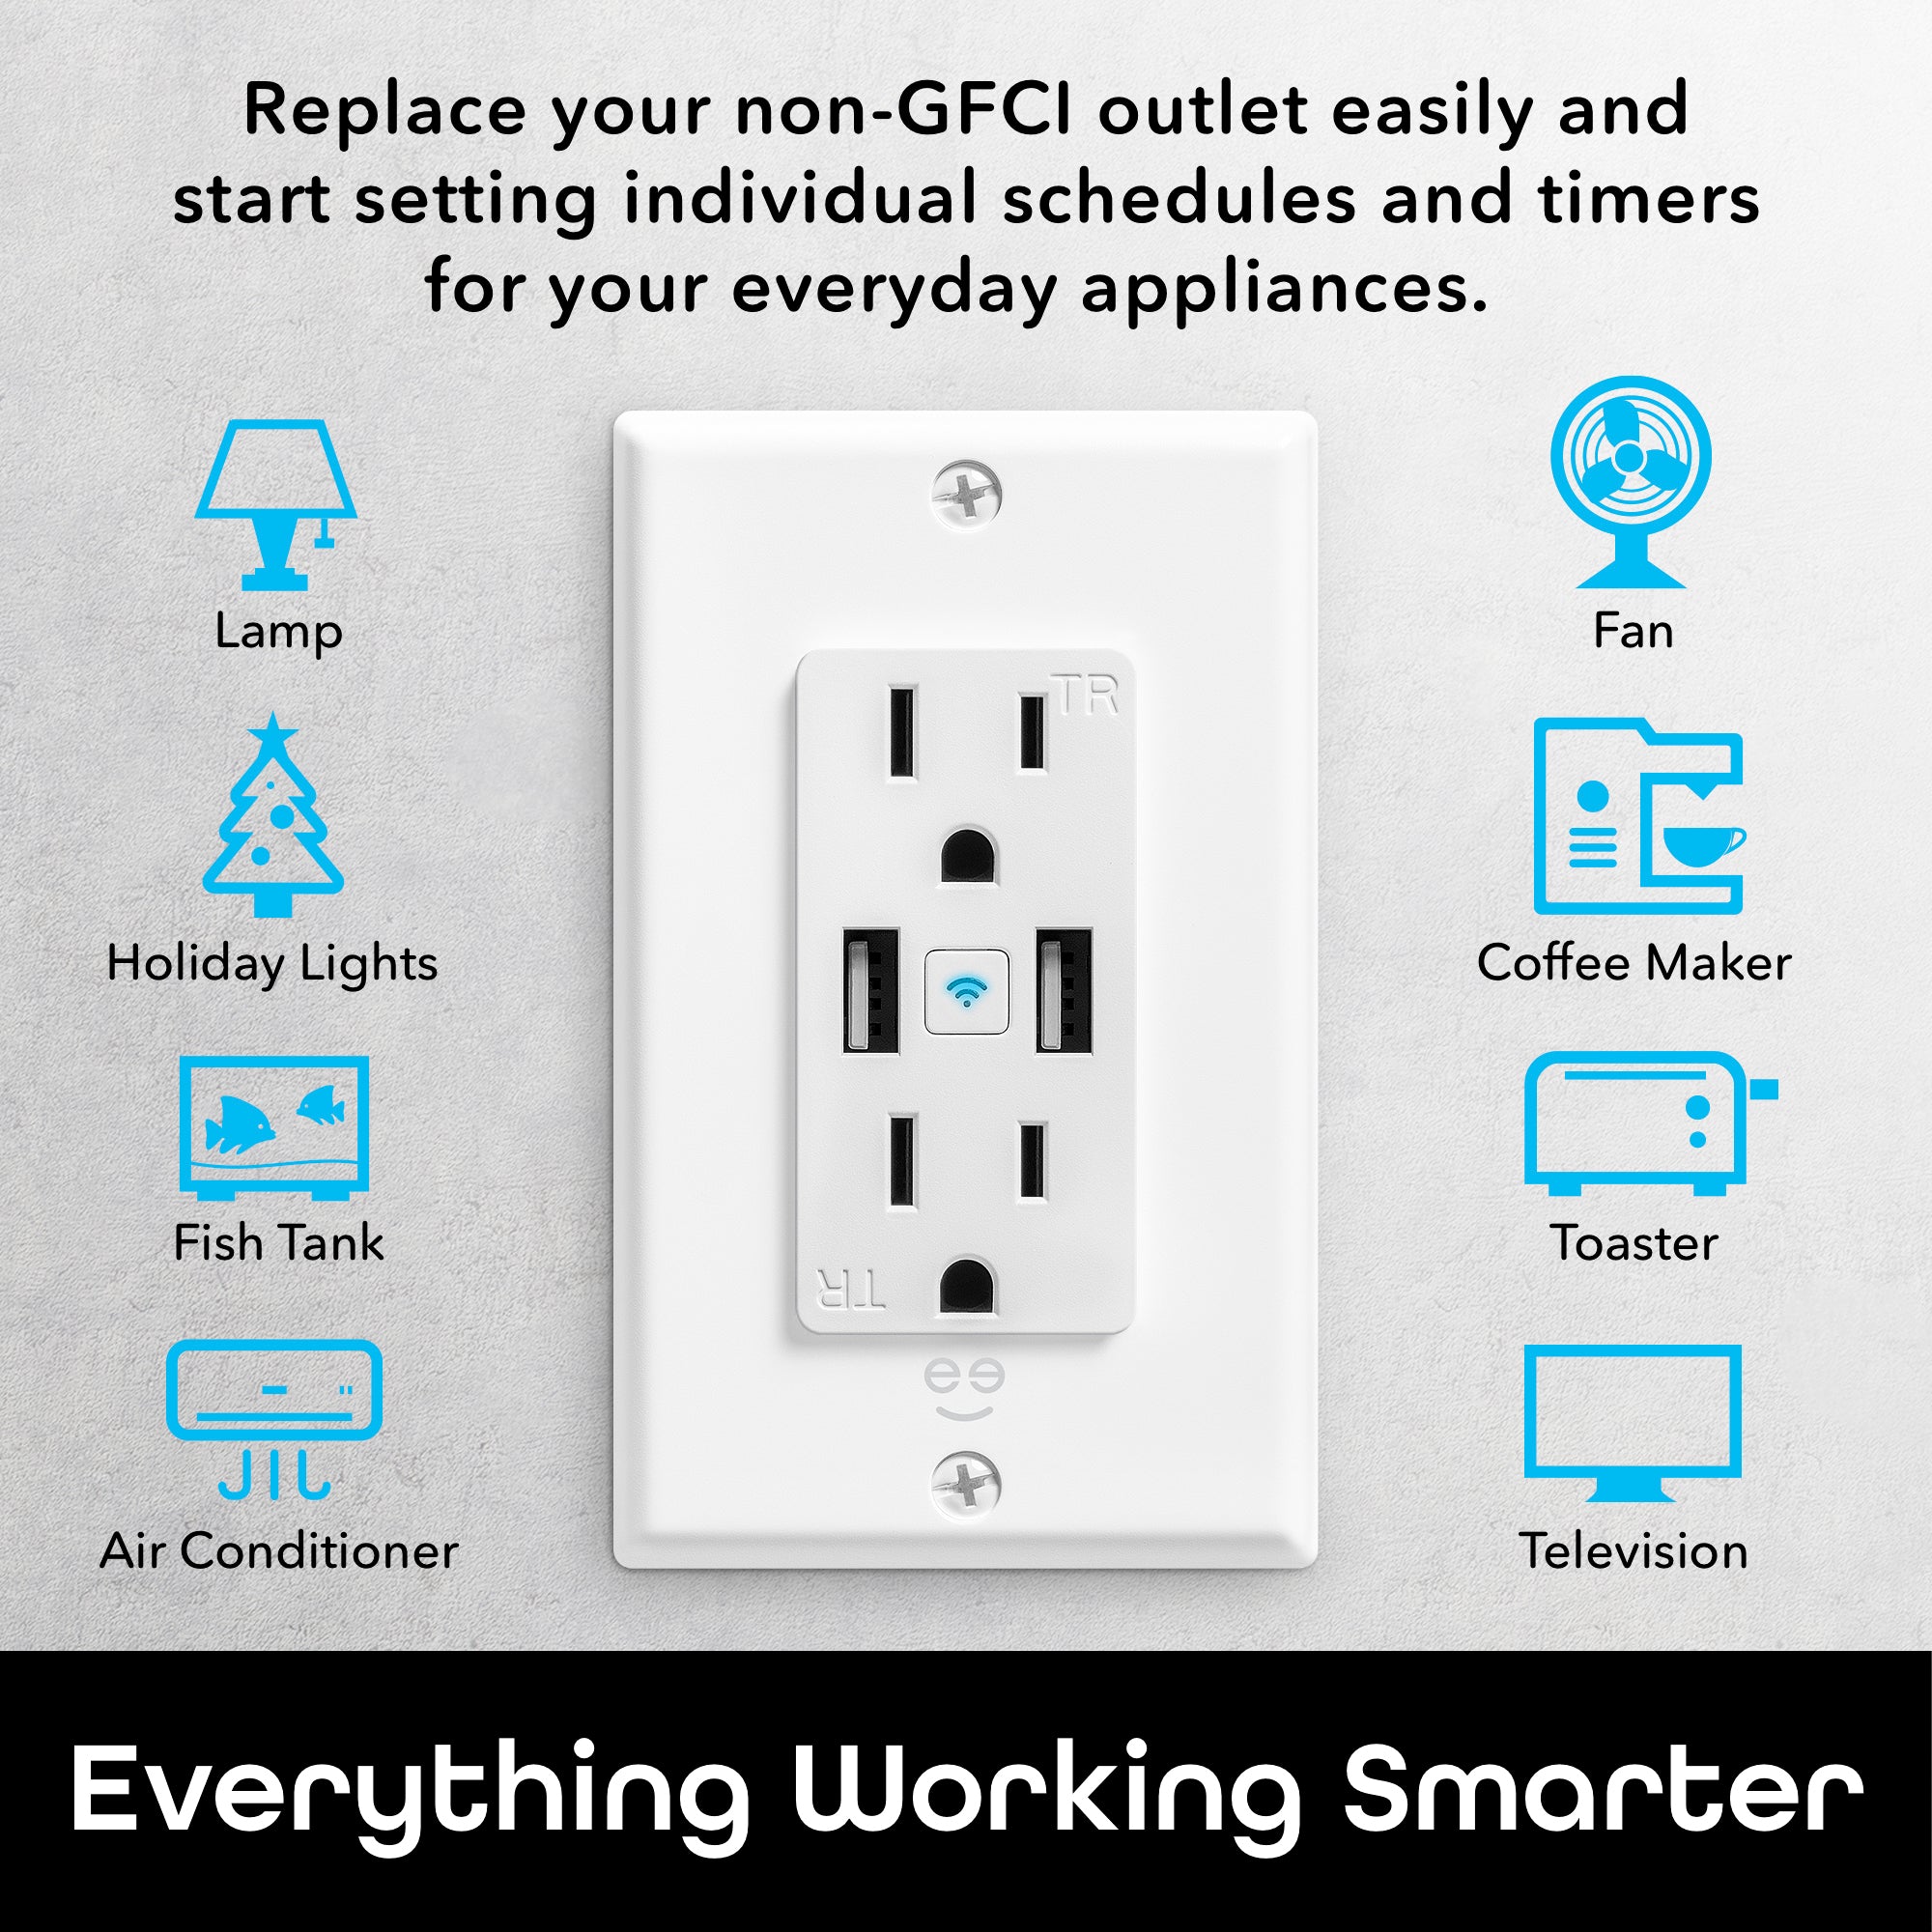 Geeni Current+Charge Smart Wall Outlet (2 Plugs & 2 USB Ports)